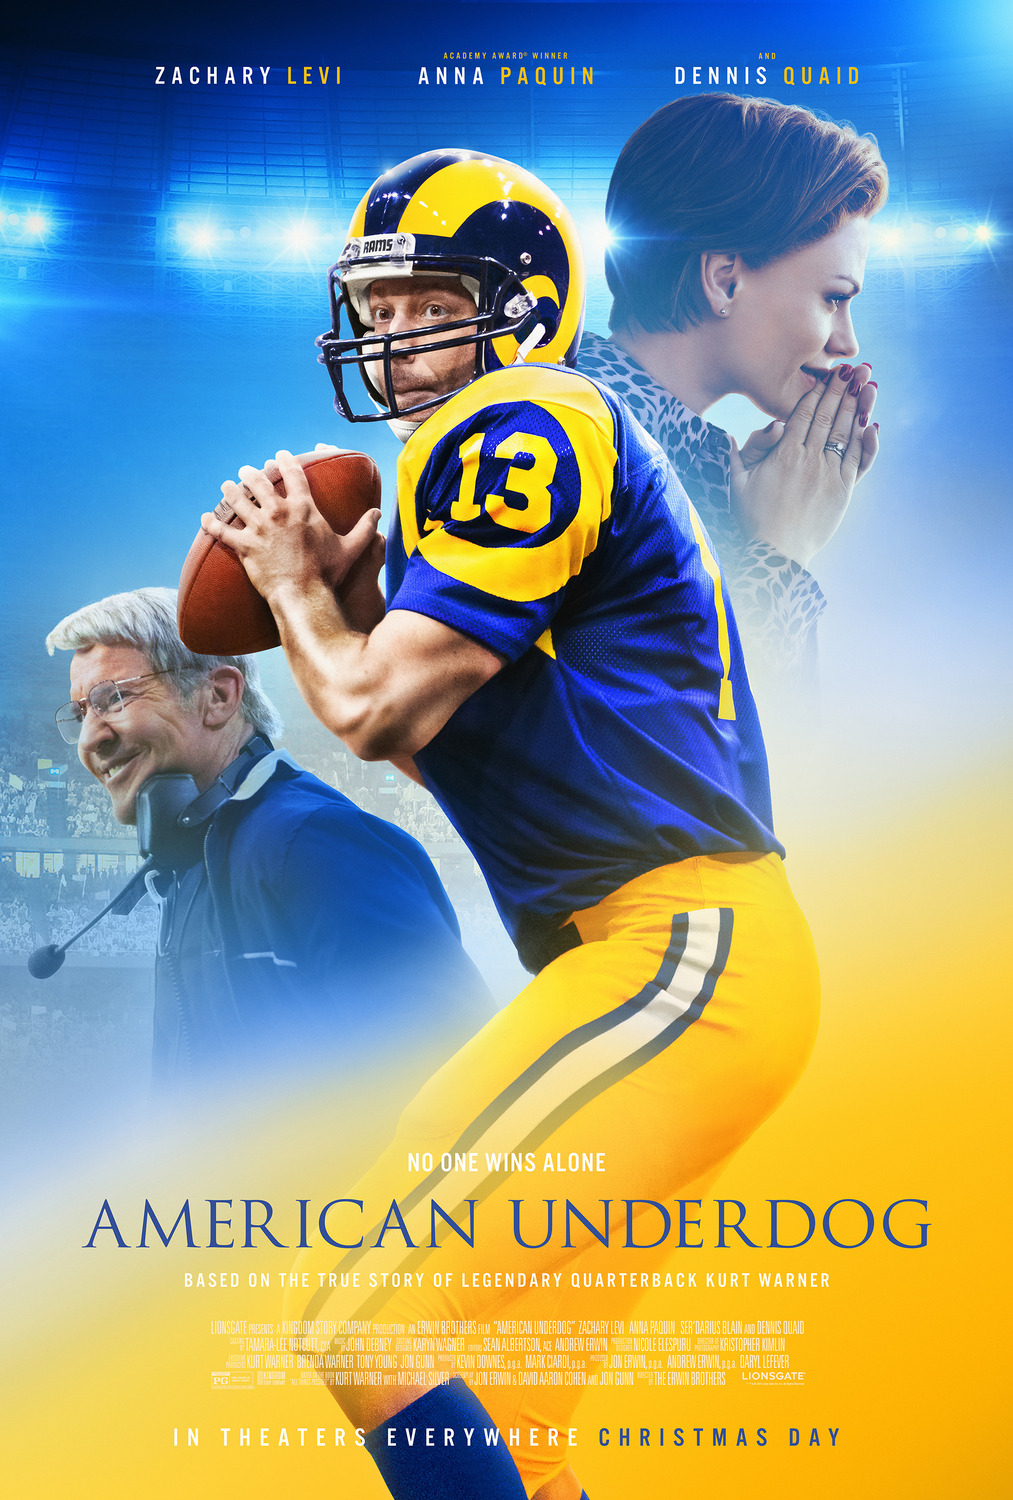 Rams wore same uniforms in the Super Bowl in movie 'Heaven Can